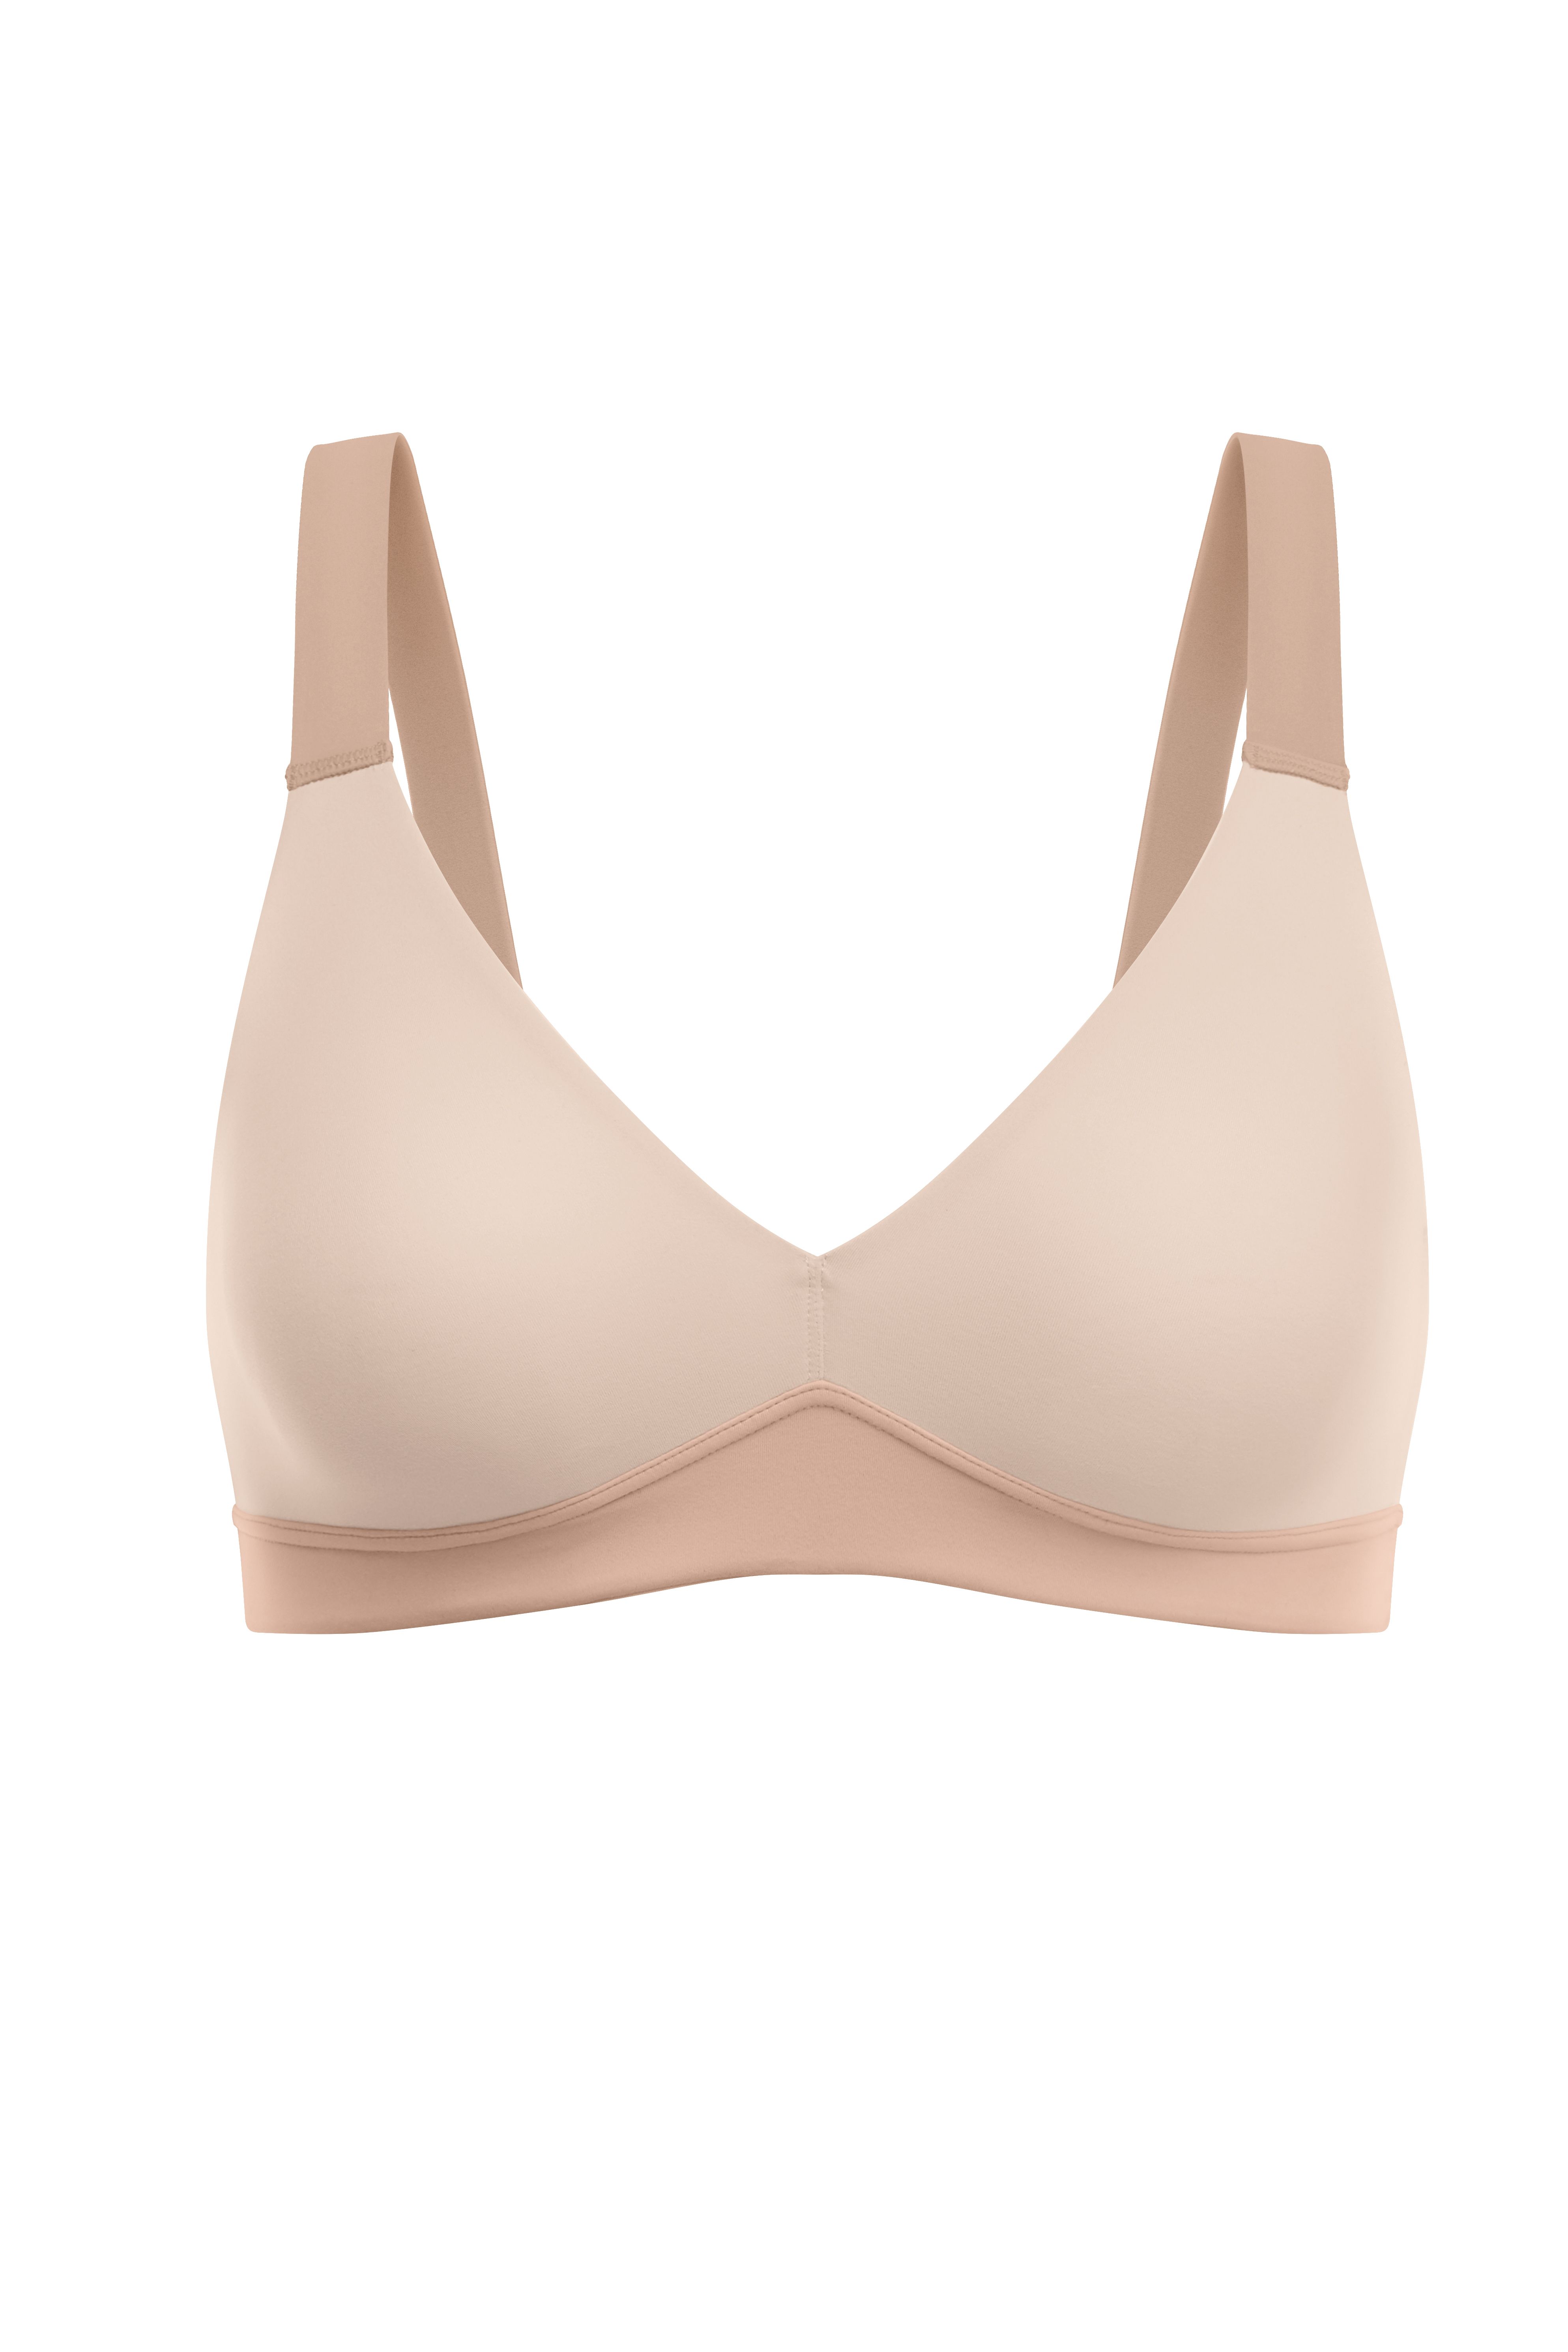 supportive bralette,Latest trends